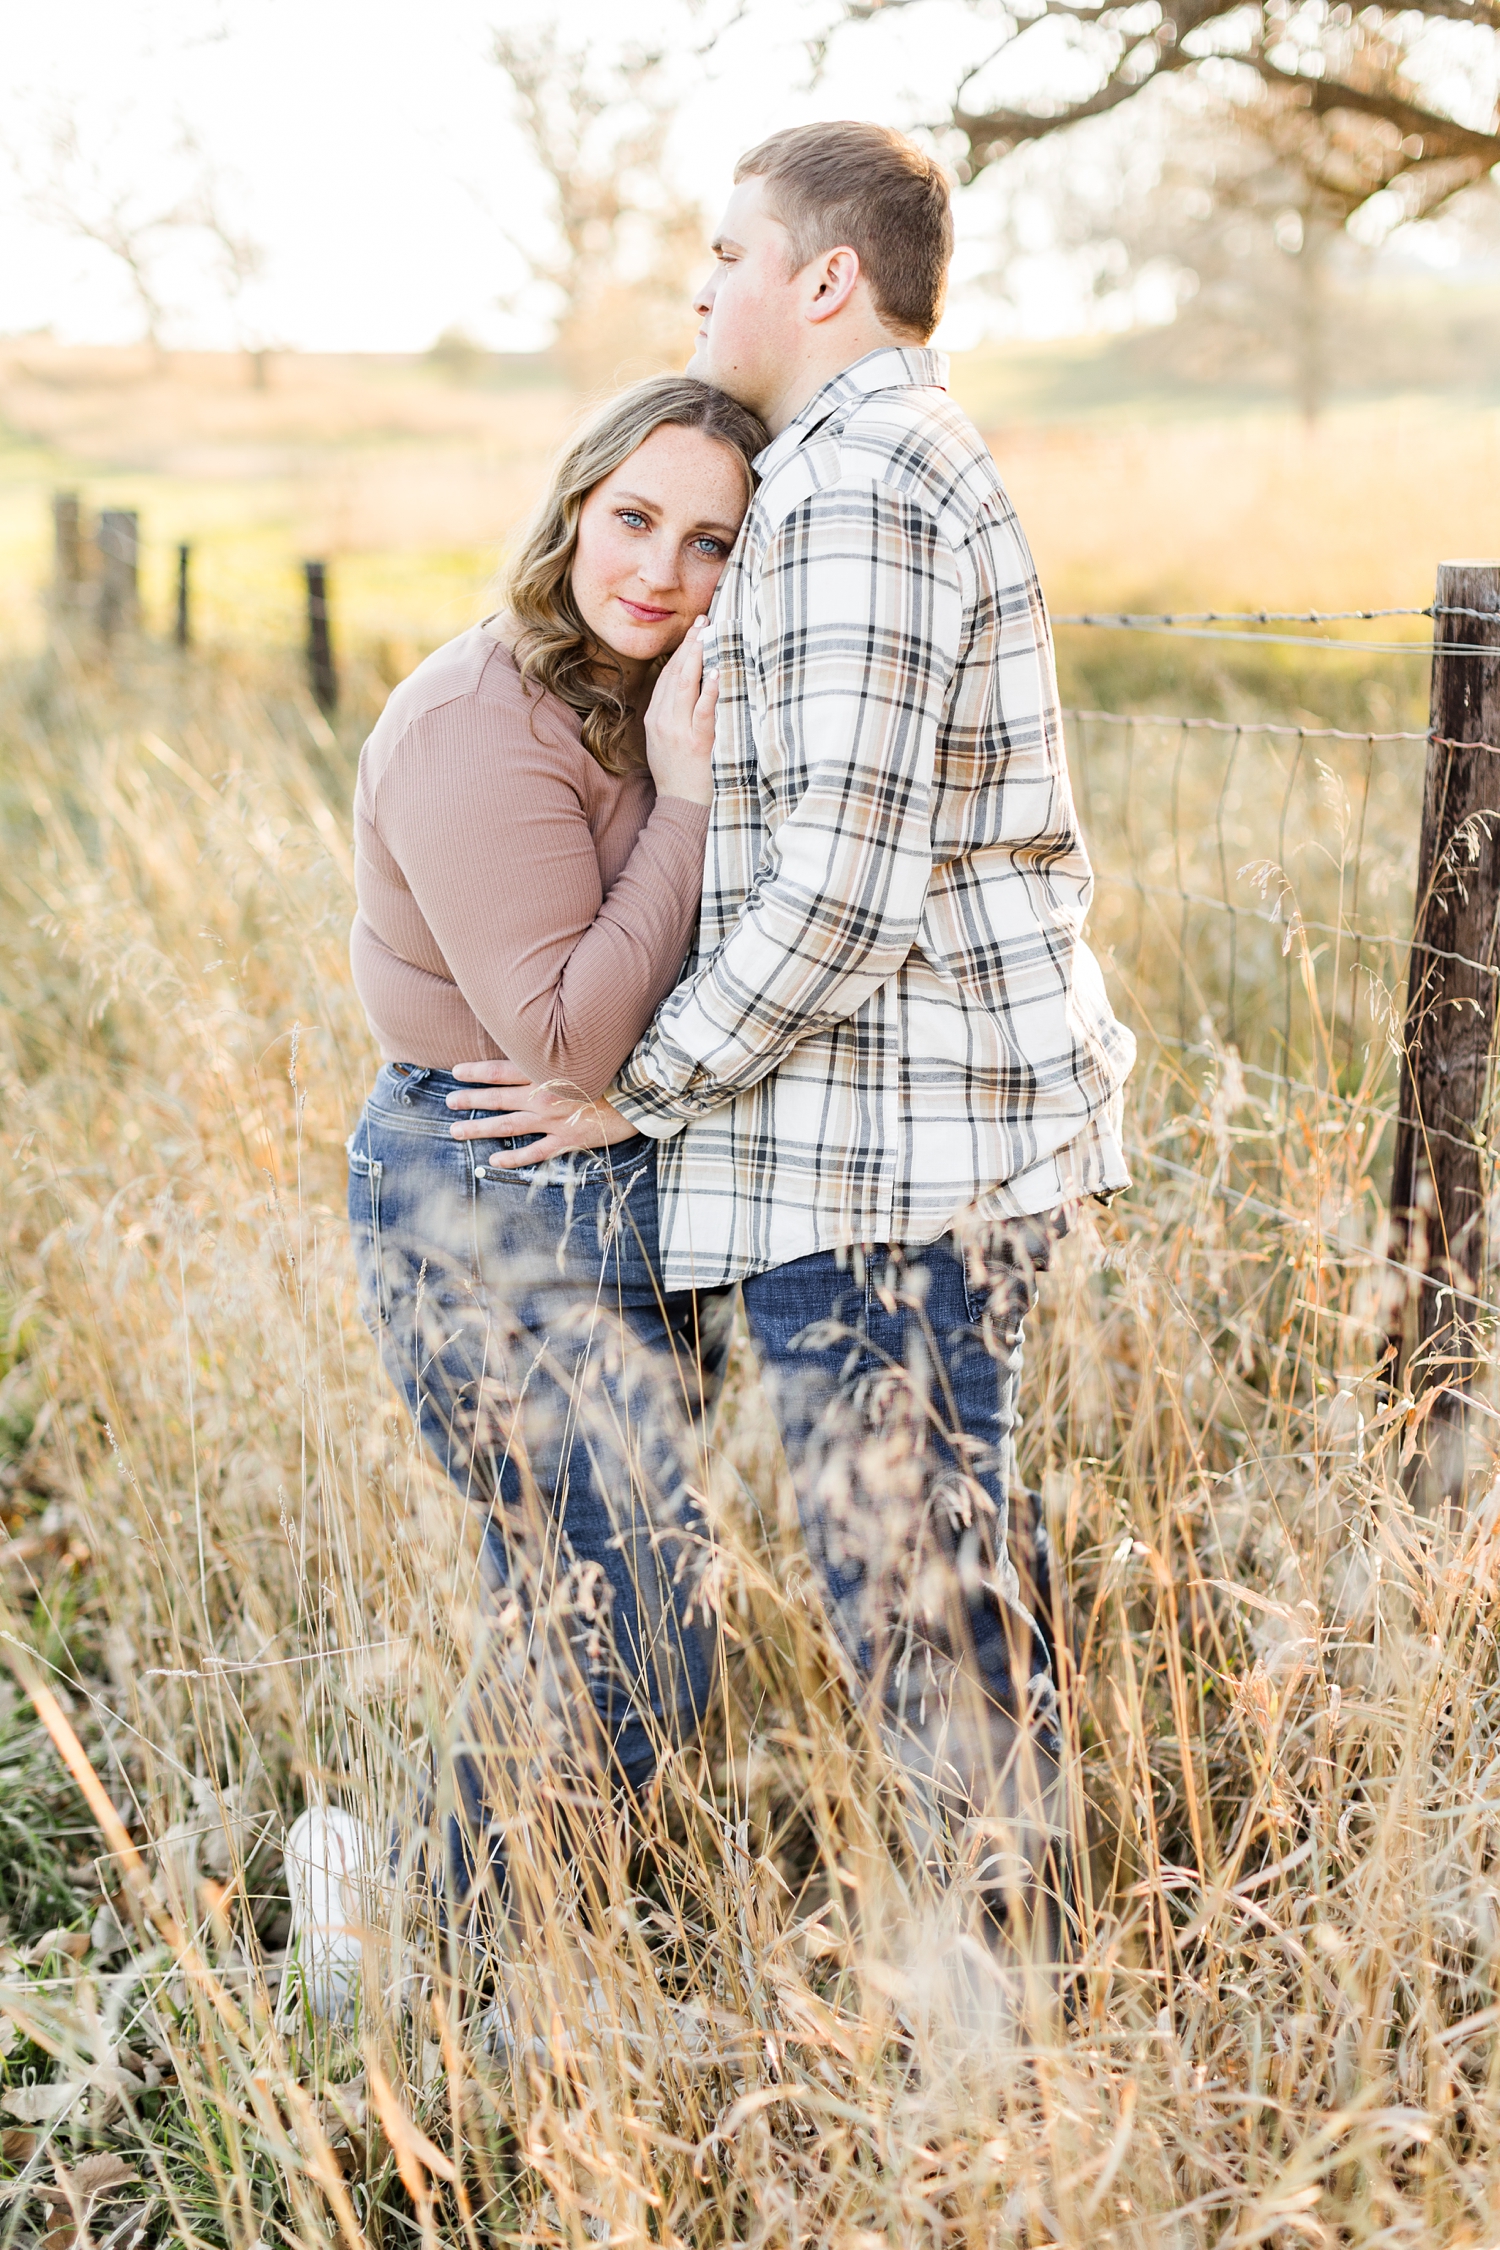 Shelby and Taylor embrace each other along a fence line in a grass pasture during golden hour in Iowa | CB Studio